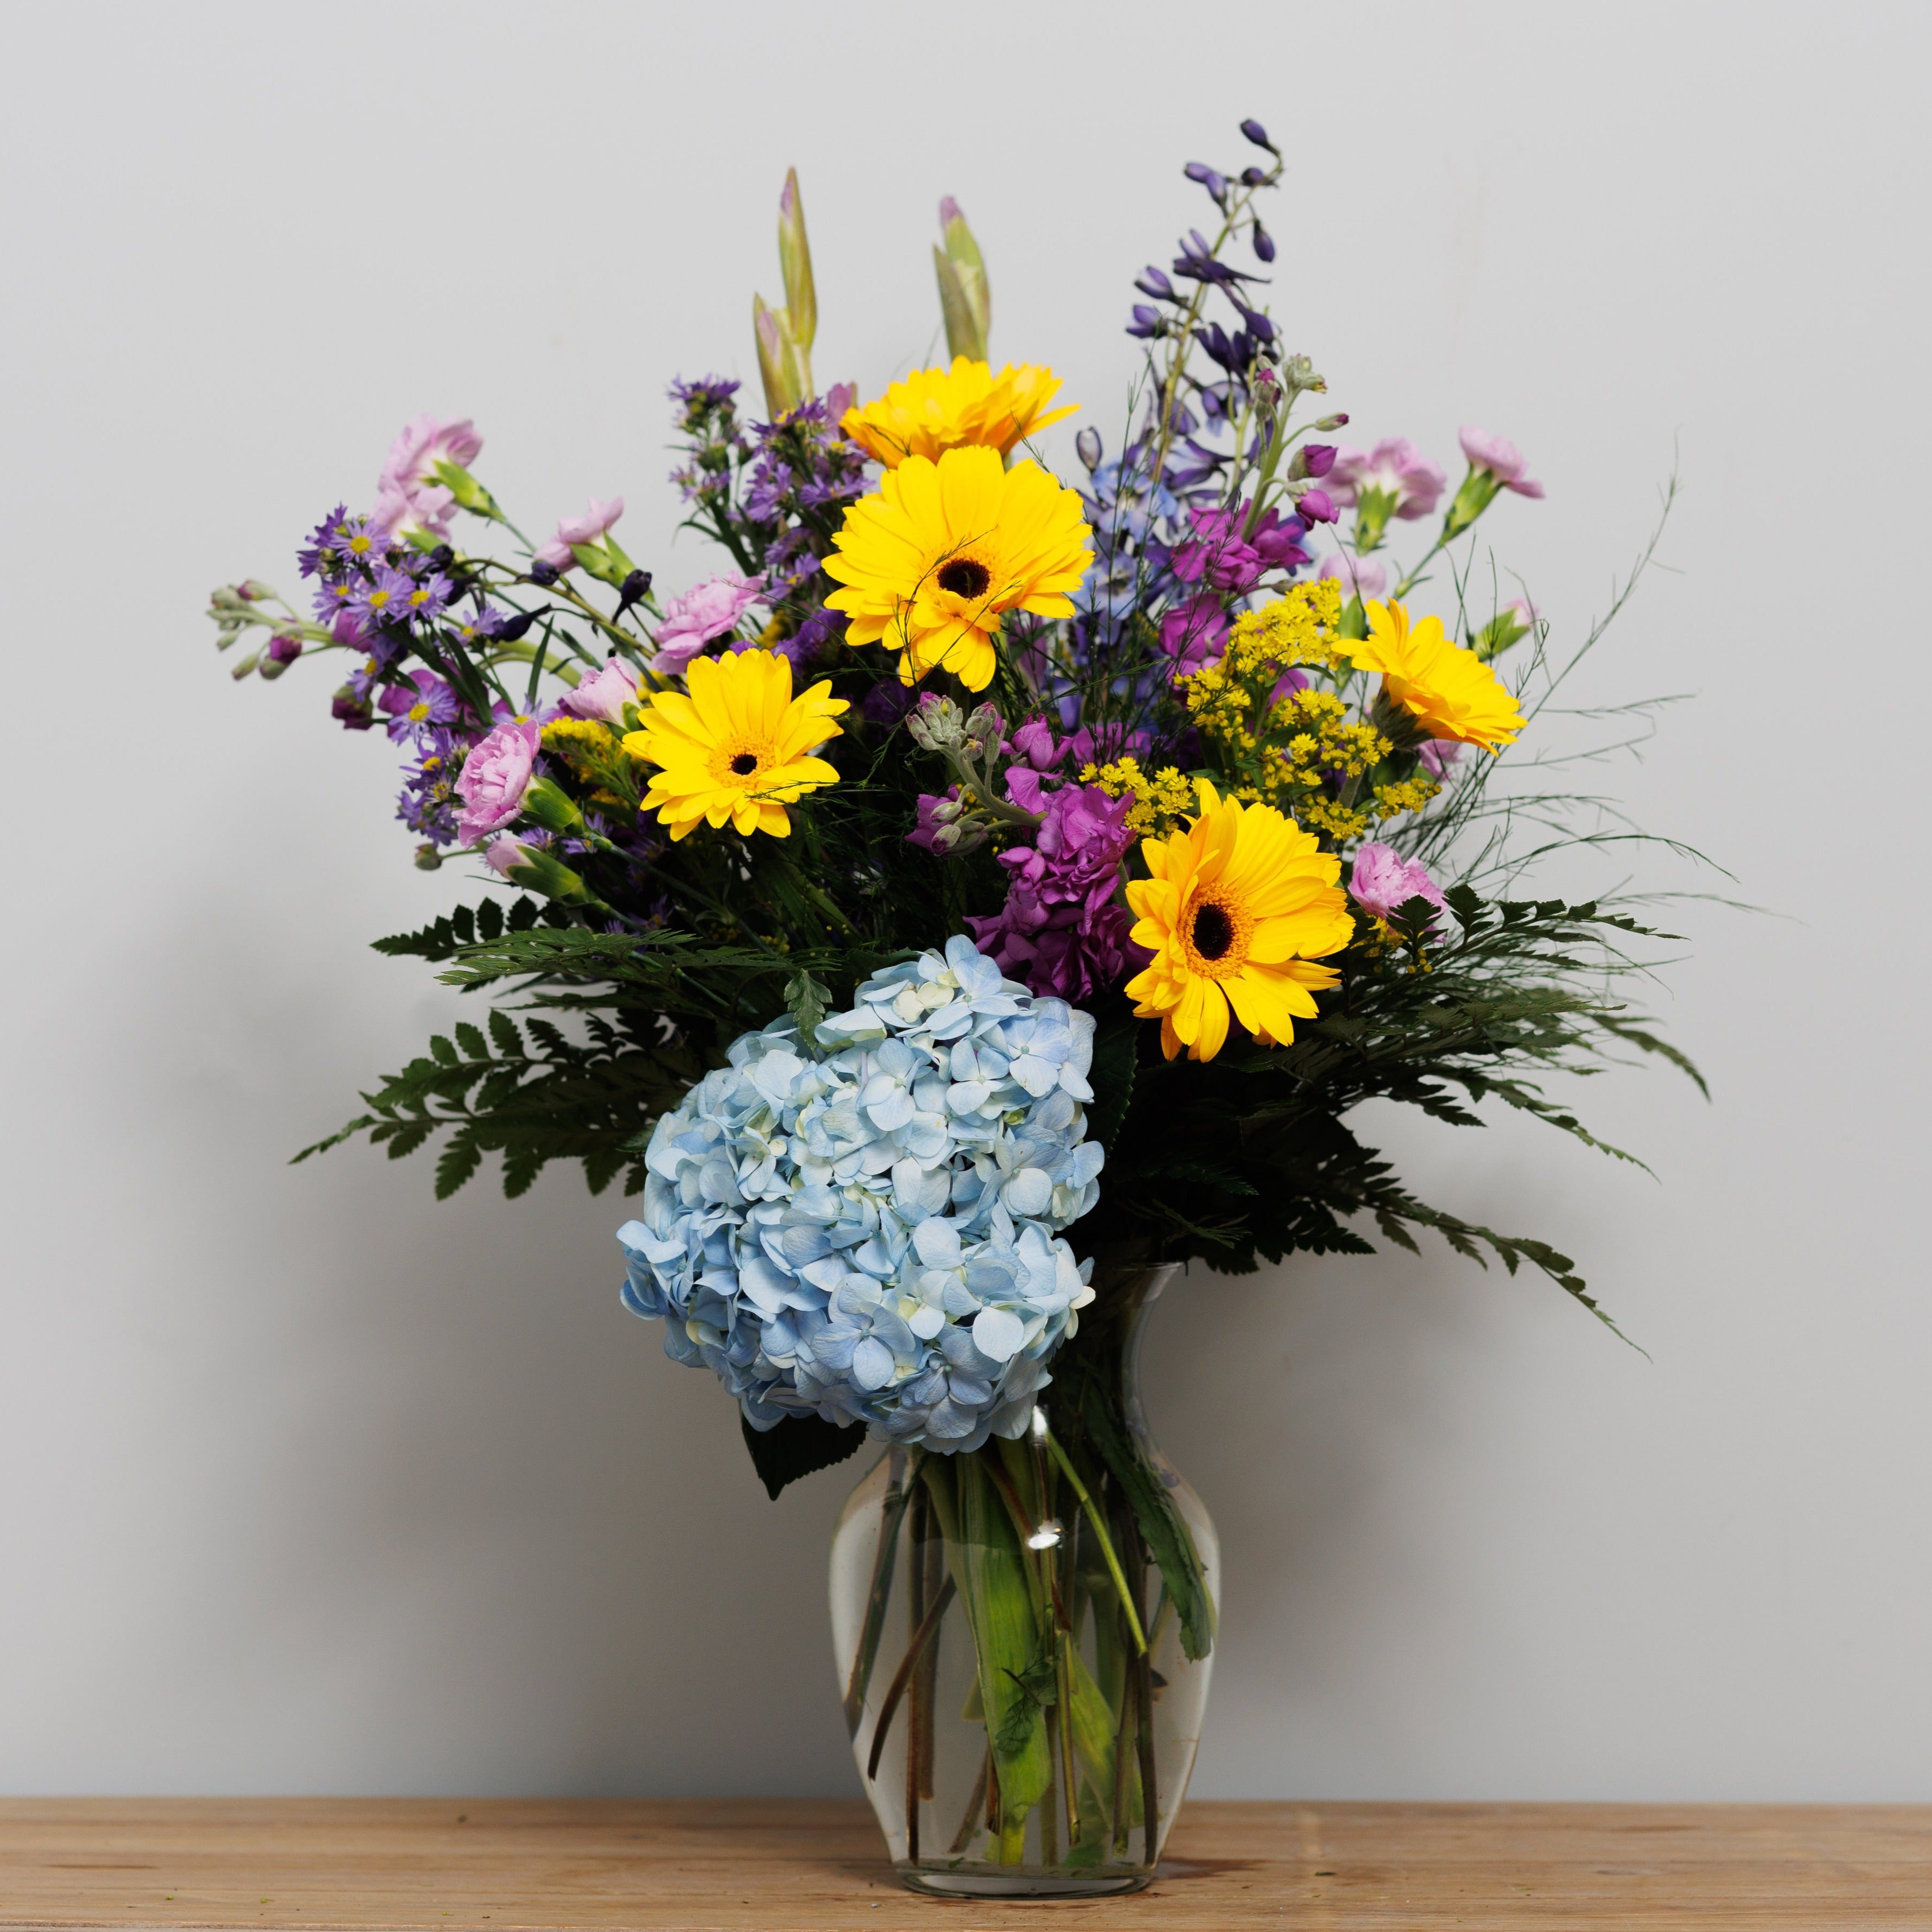 Yellow Gerber daisies with blue and purple blooms in a vase.